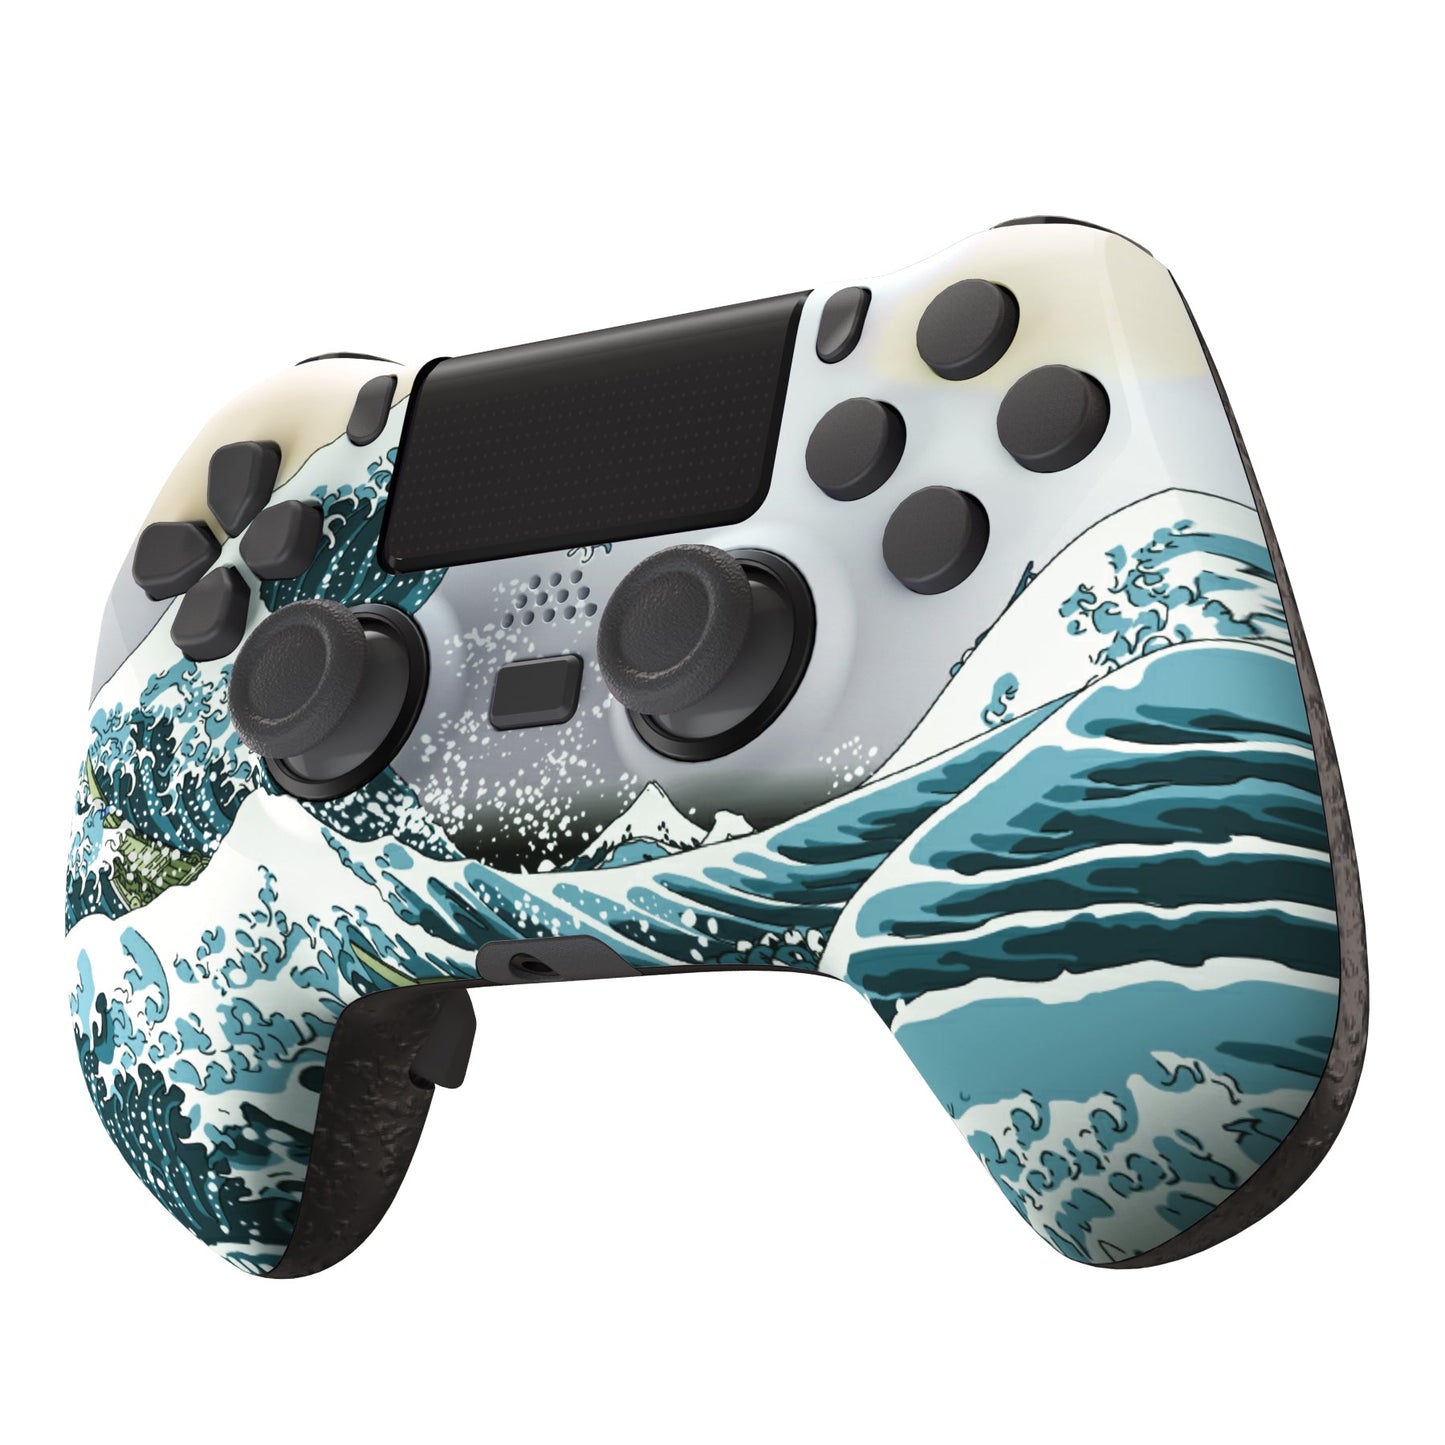 eXtremeRate Retail The Great Wave DECADE Tournament Controller (DTC) Upgrade Kit for ps4 Controller JDM-040/050/055, Upgrade Board & Ergonomic Shell & Back Buttons & Trigger Stops - Controller NOT Included - P4MG007